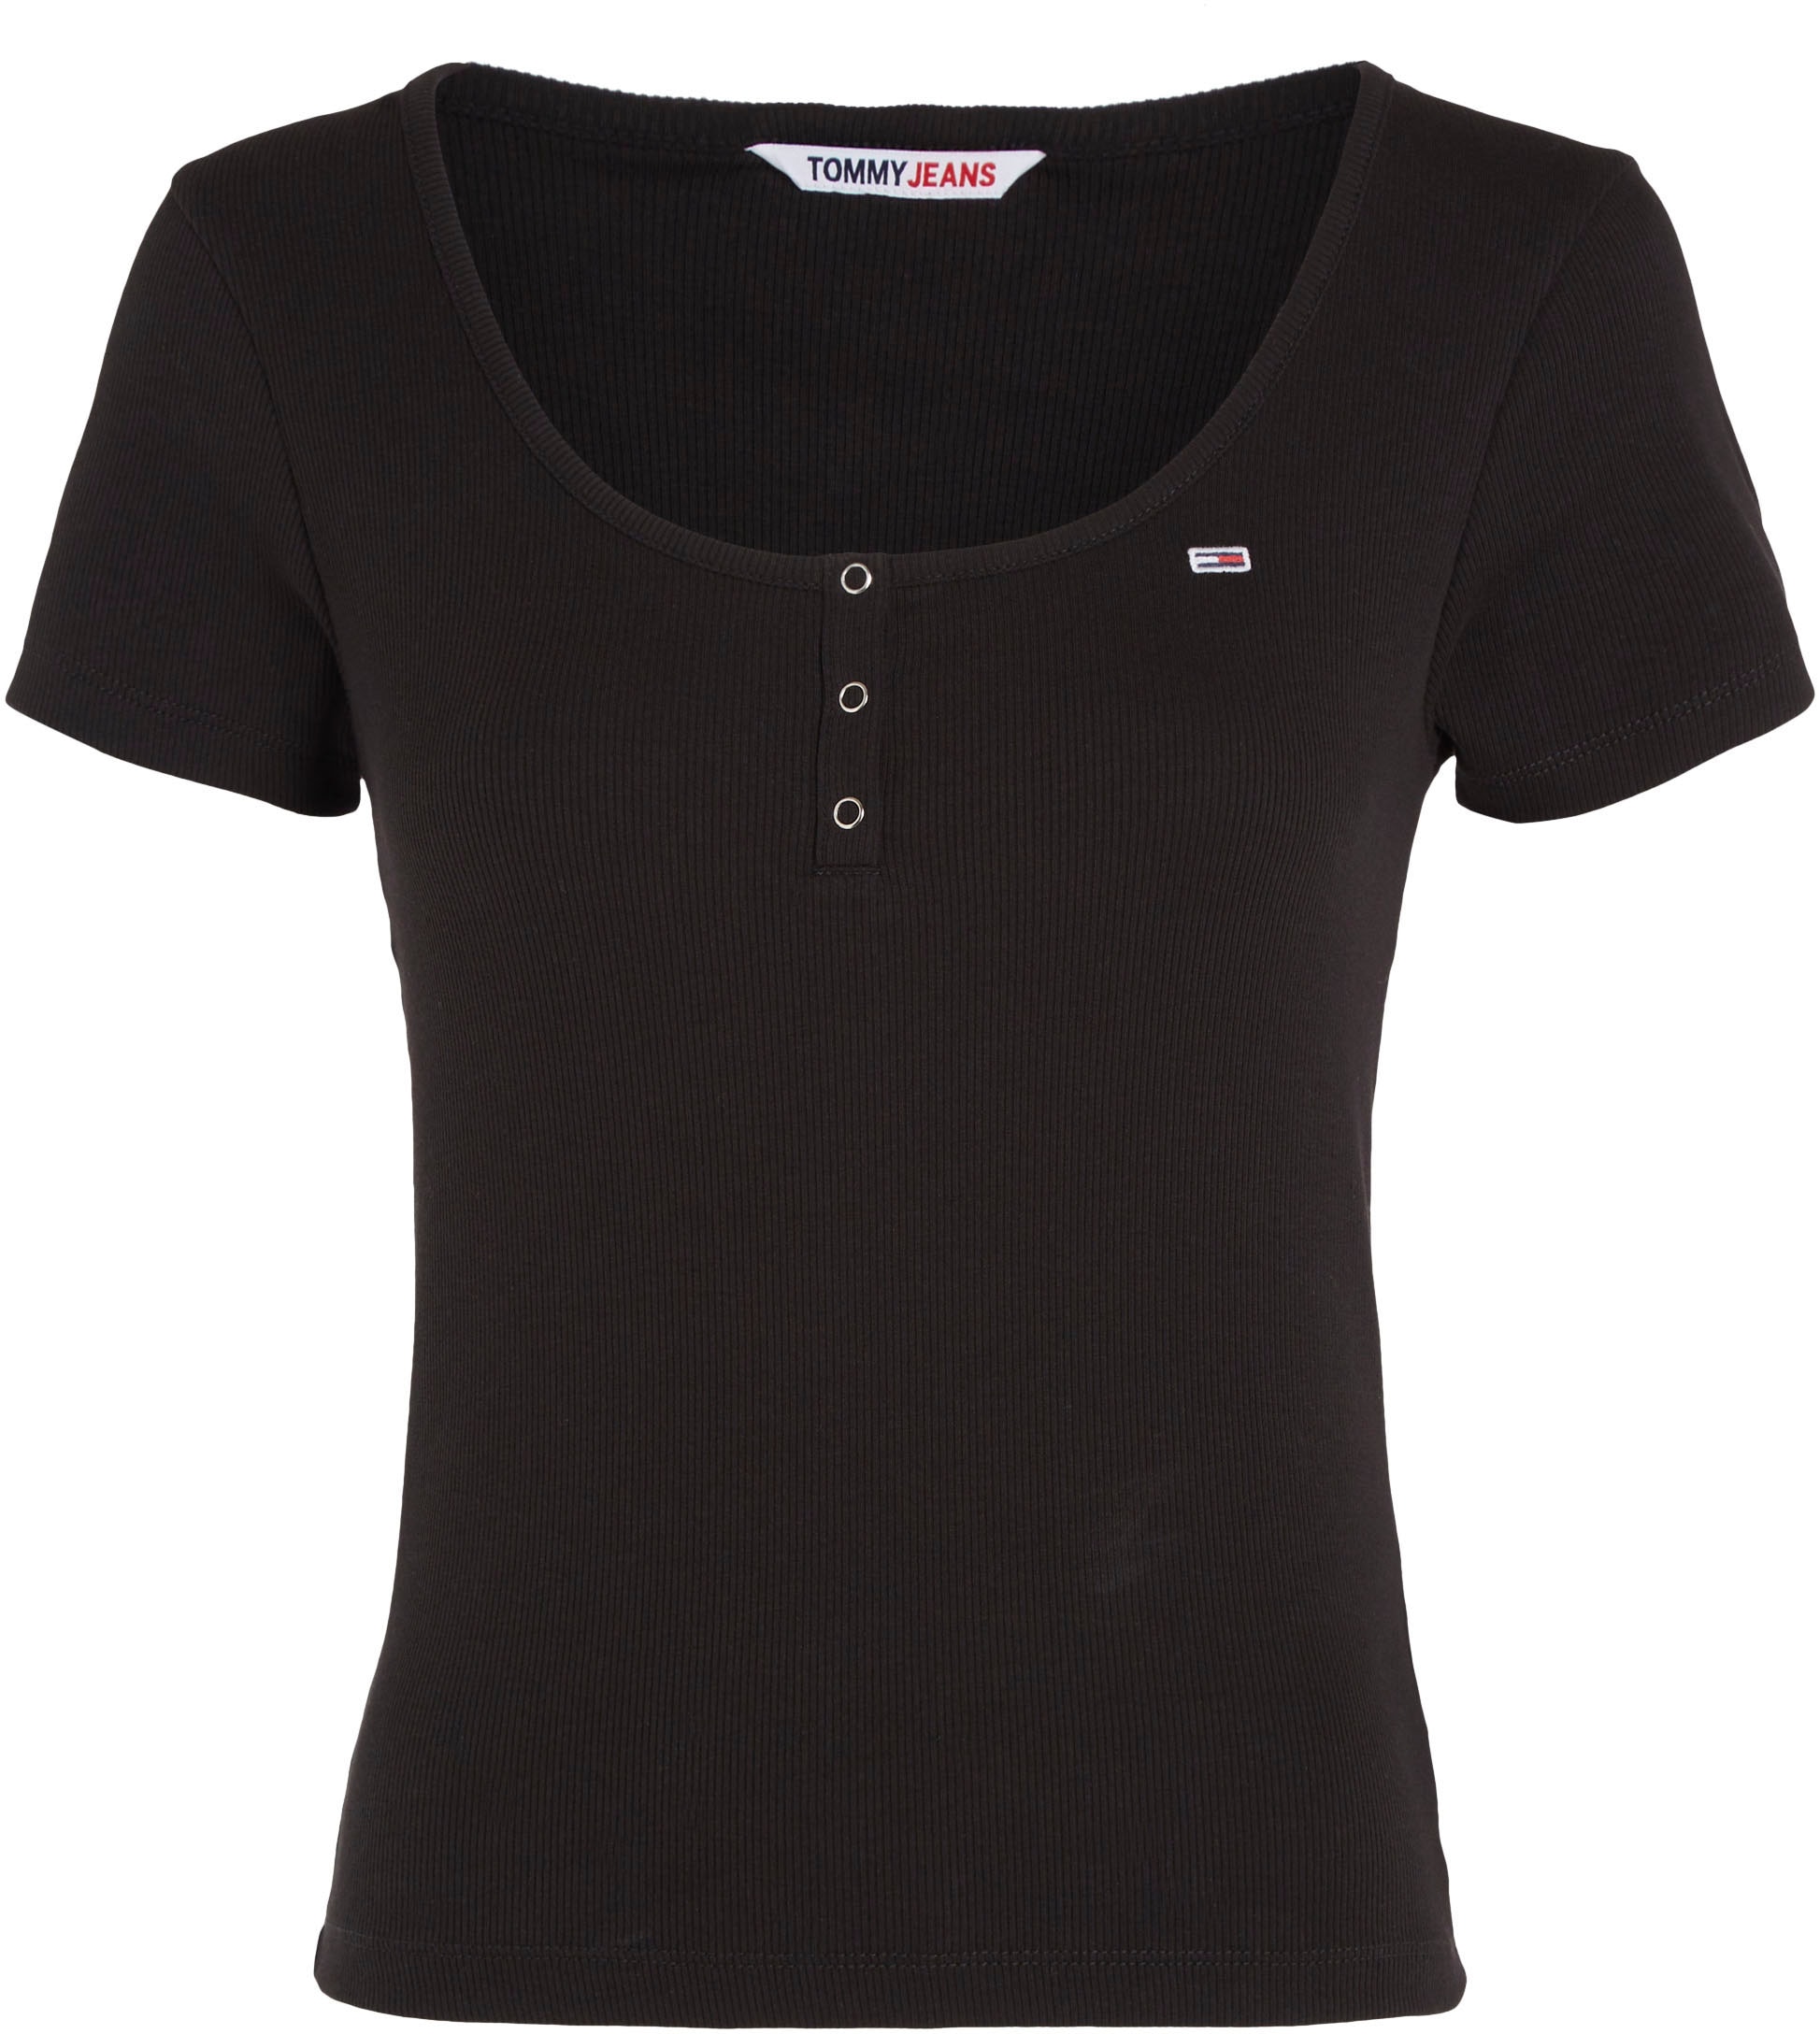 Tommy Jeans T-Shirt »TJW Jeans Logostickerei bei ♕ C-NECK«, BBY BUTTON mit Tommy RIB